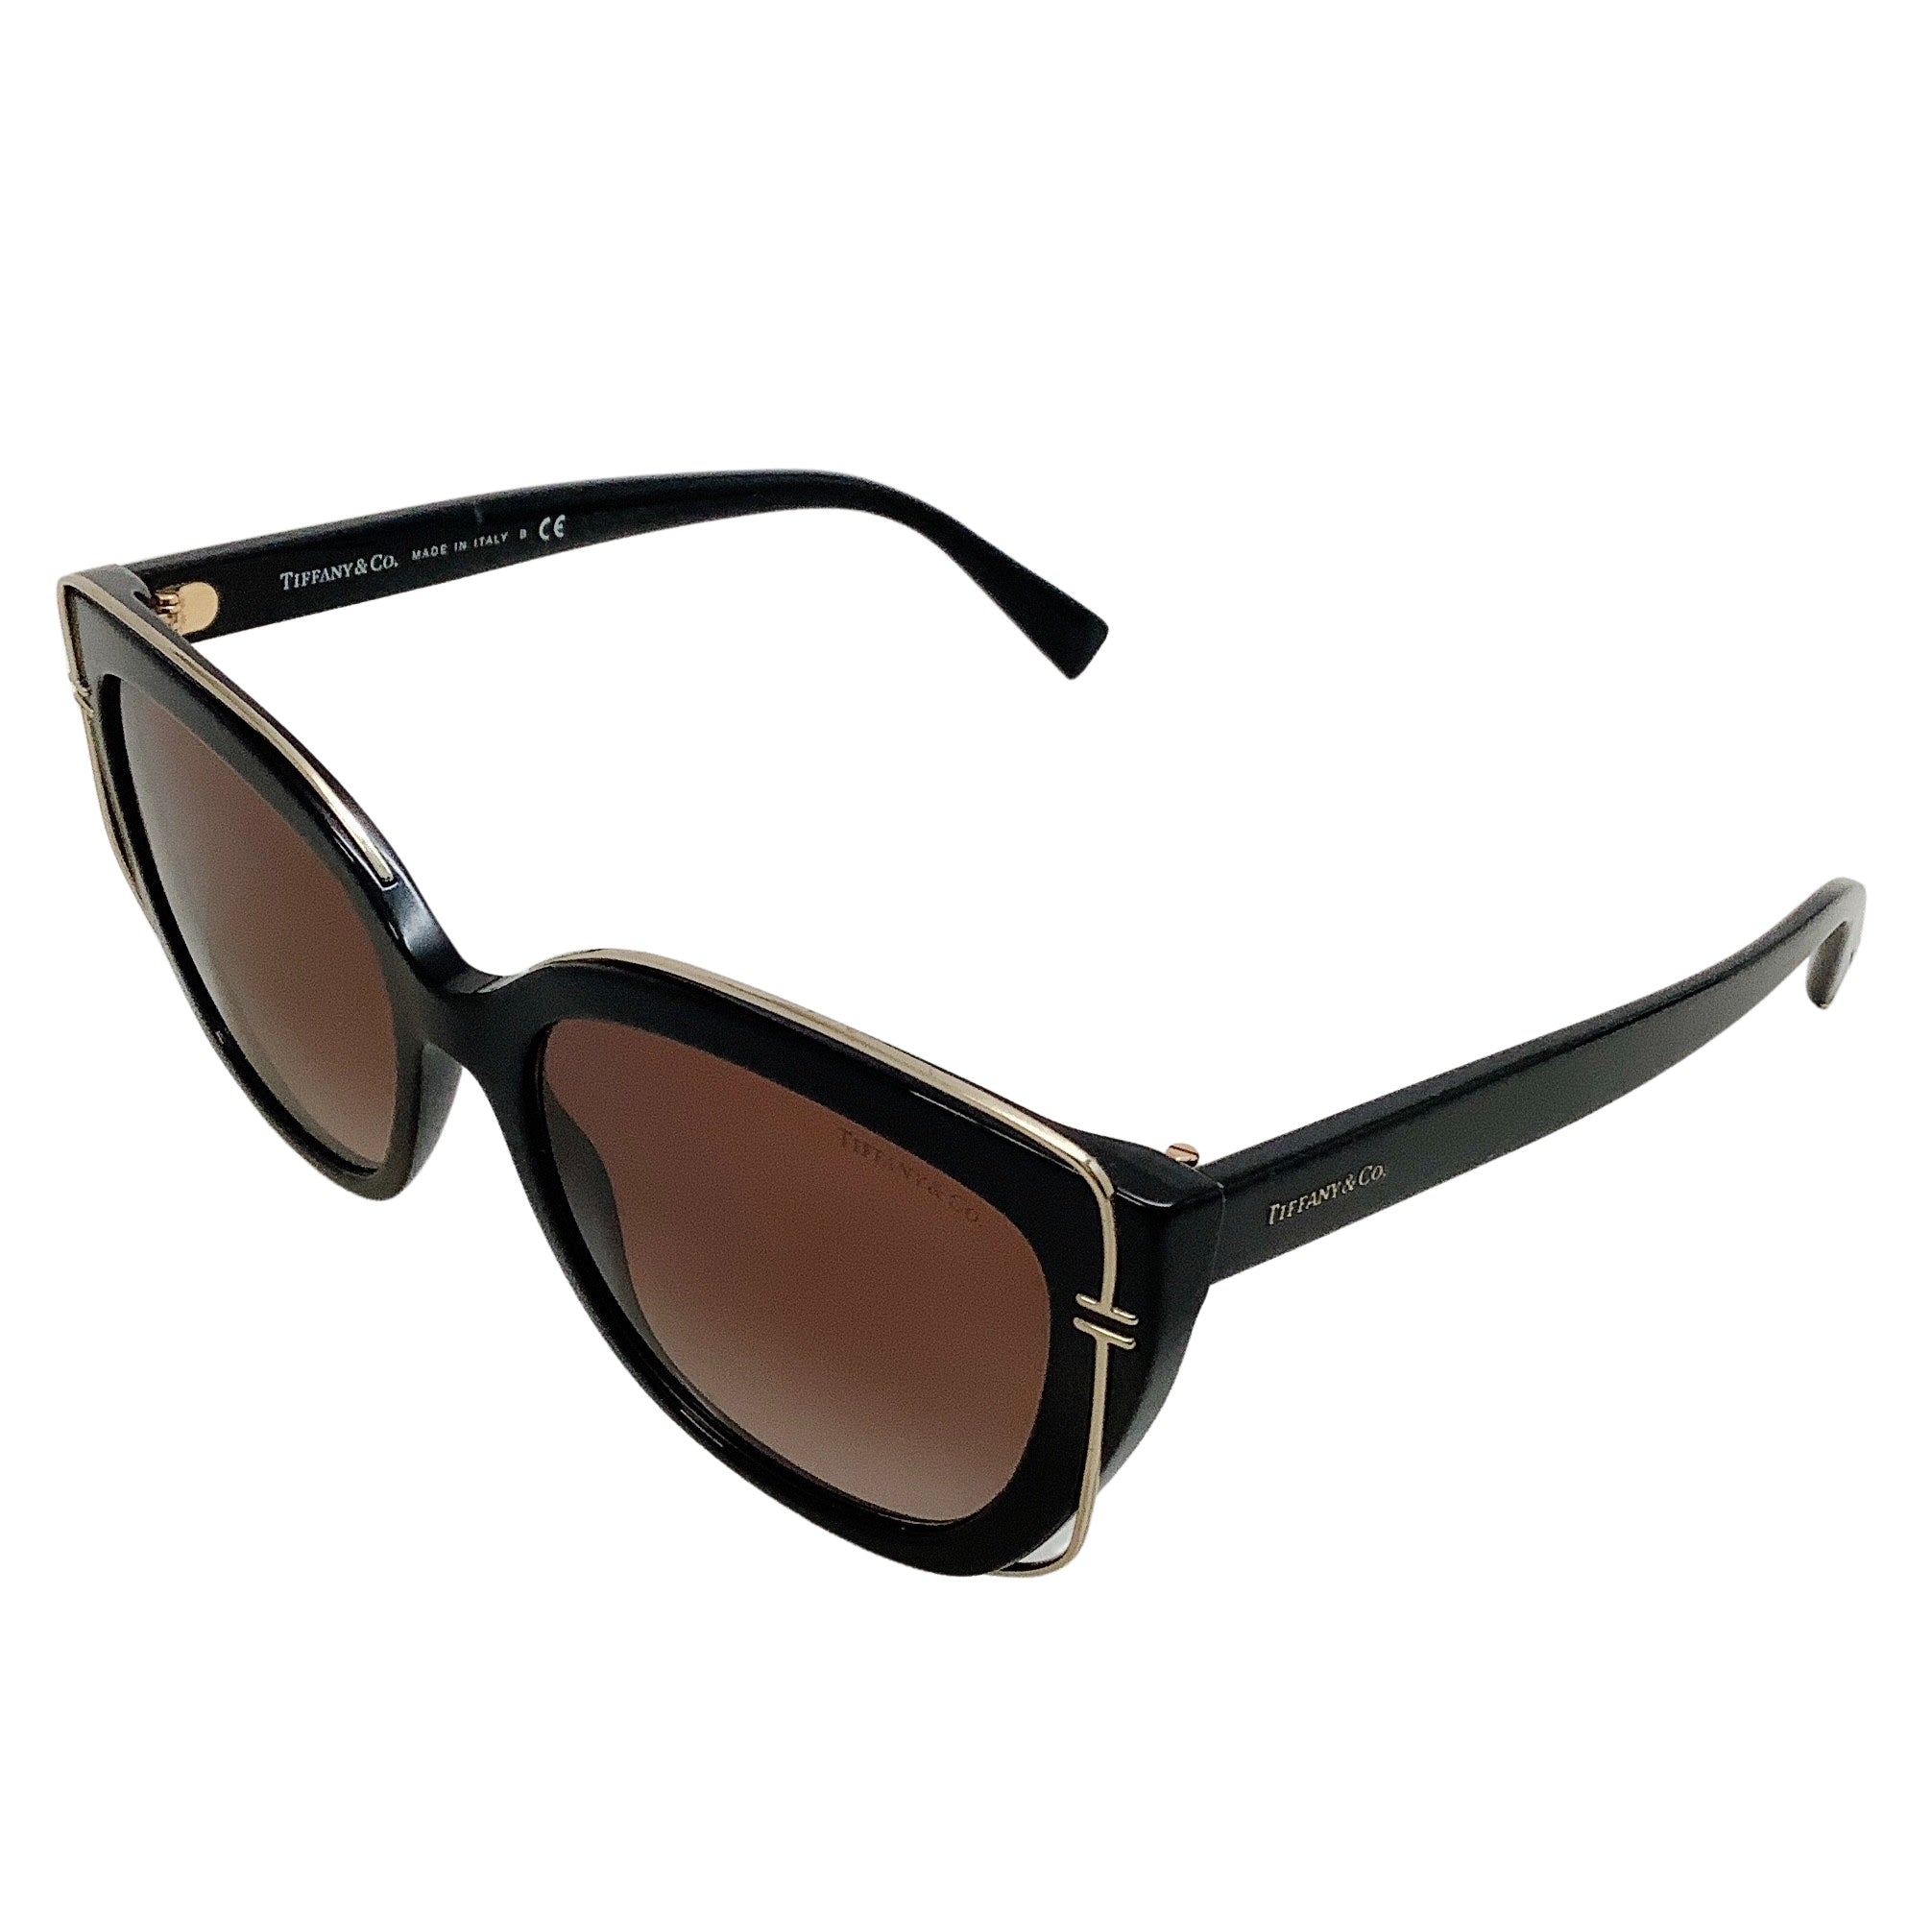 Tiffany & Co. 4148 Black with Gold Detail Cat Eye Sunglasses